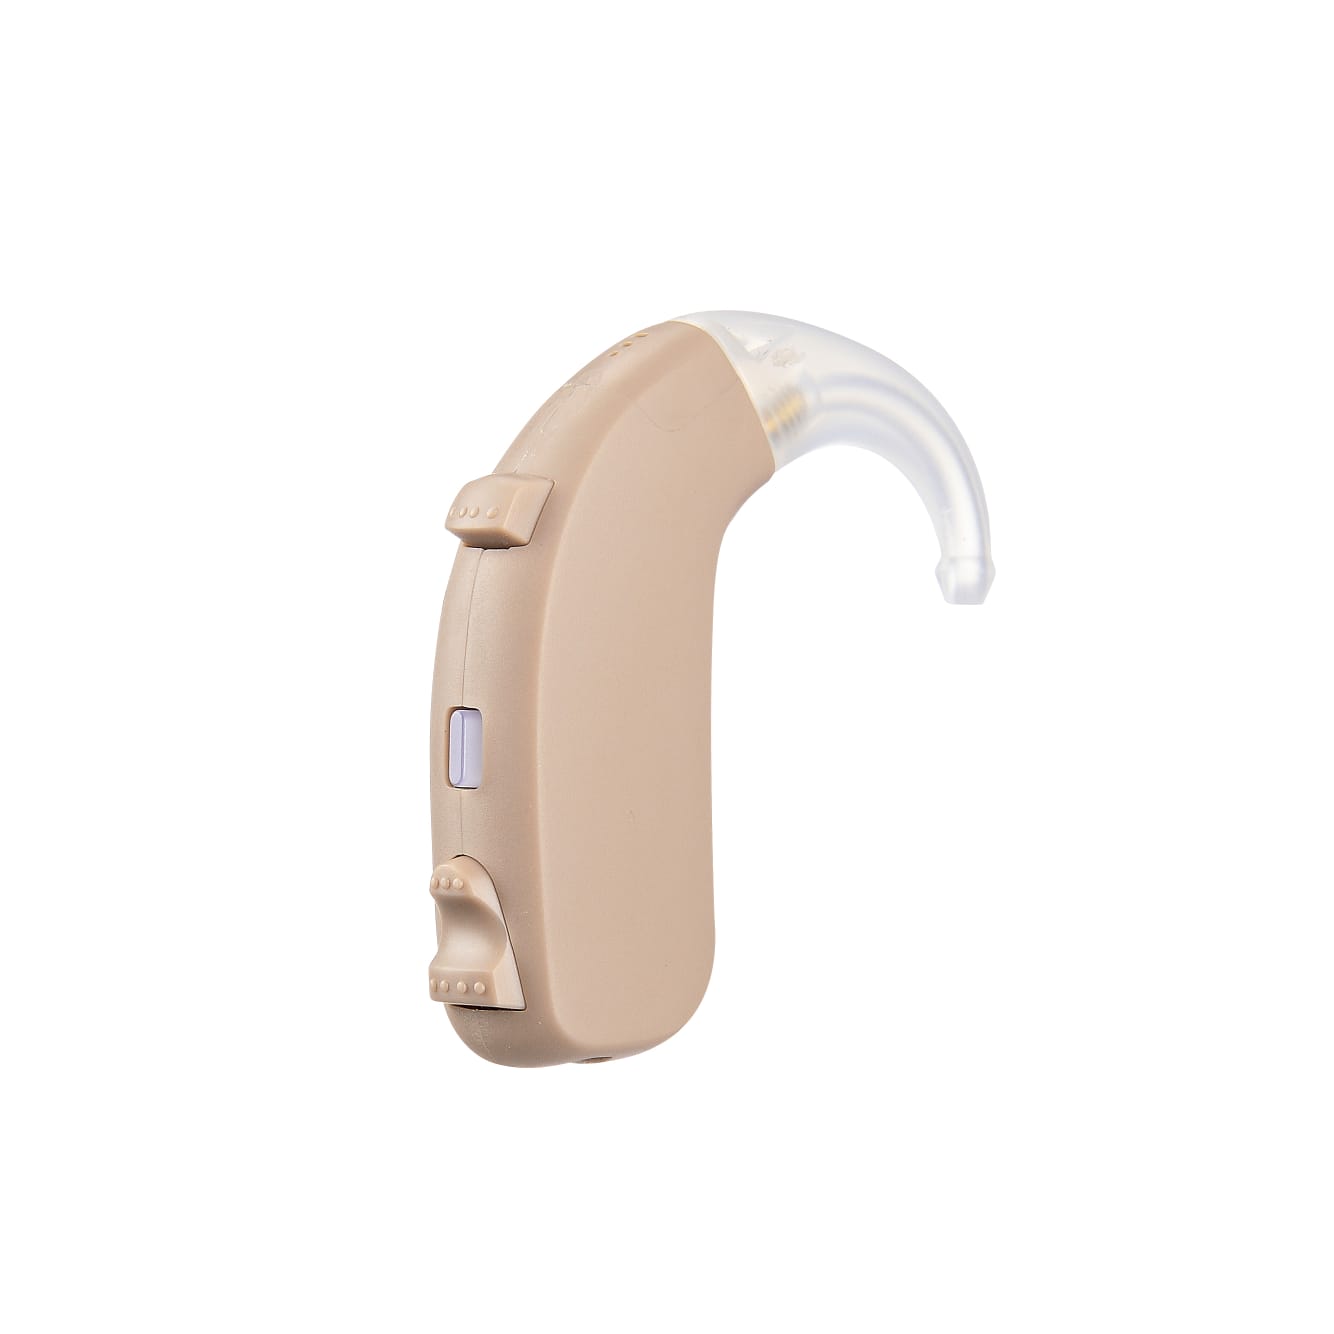 eEAR® Pair of BTE-26SP Peak Gain 70dB Improved Behind The Ear BTE Digital Hearing Aid Designed for Severe Hearing Loss Designed and Engineered in the USA Sold 5,000+ worldwide